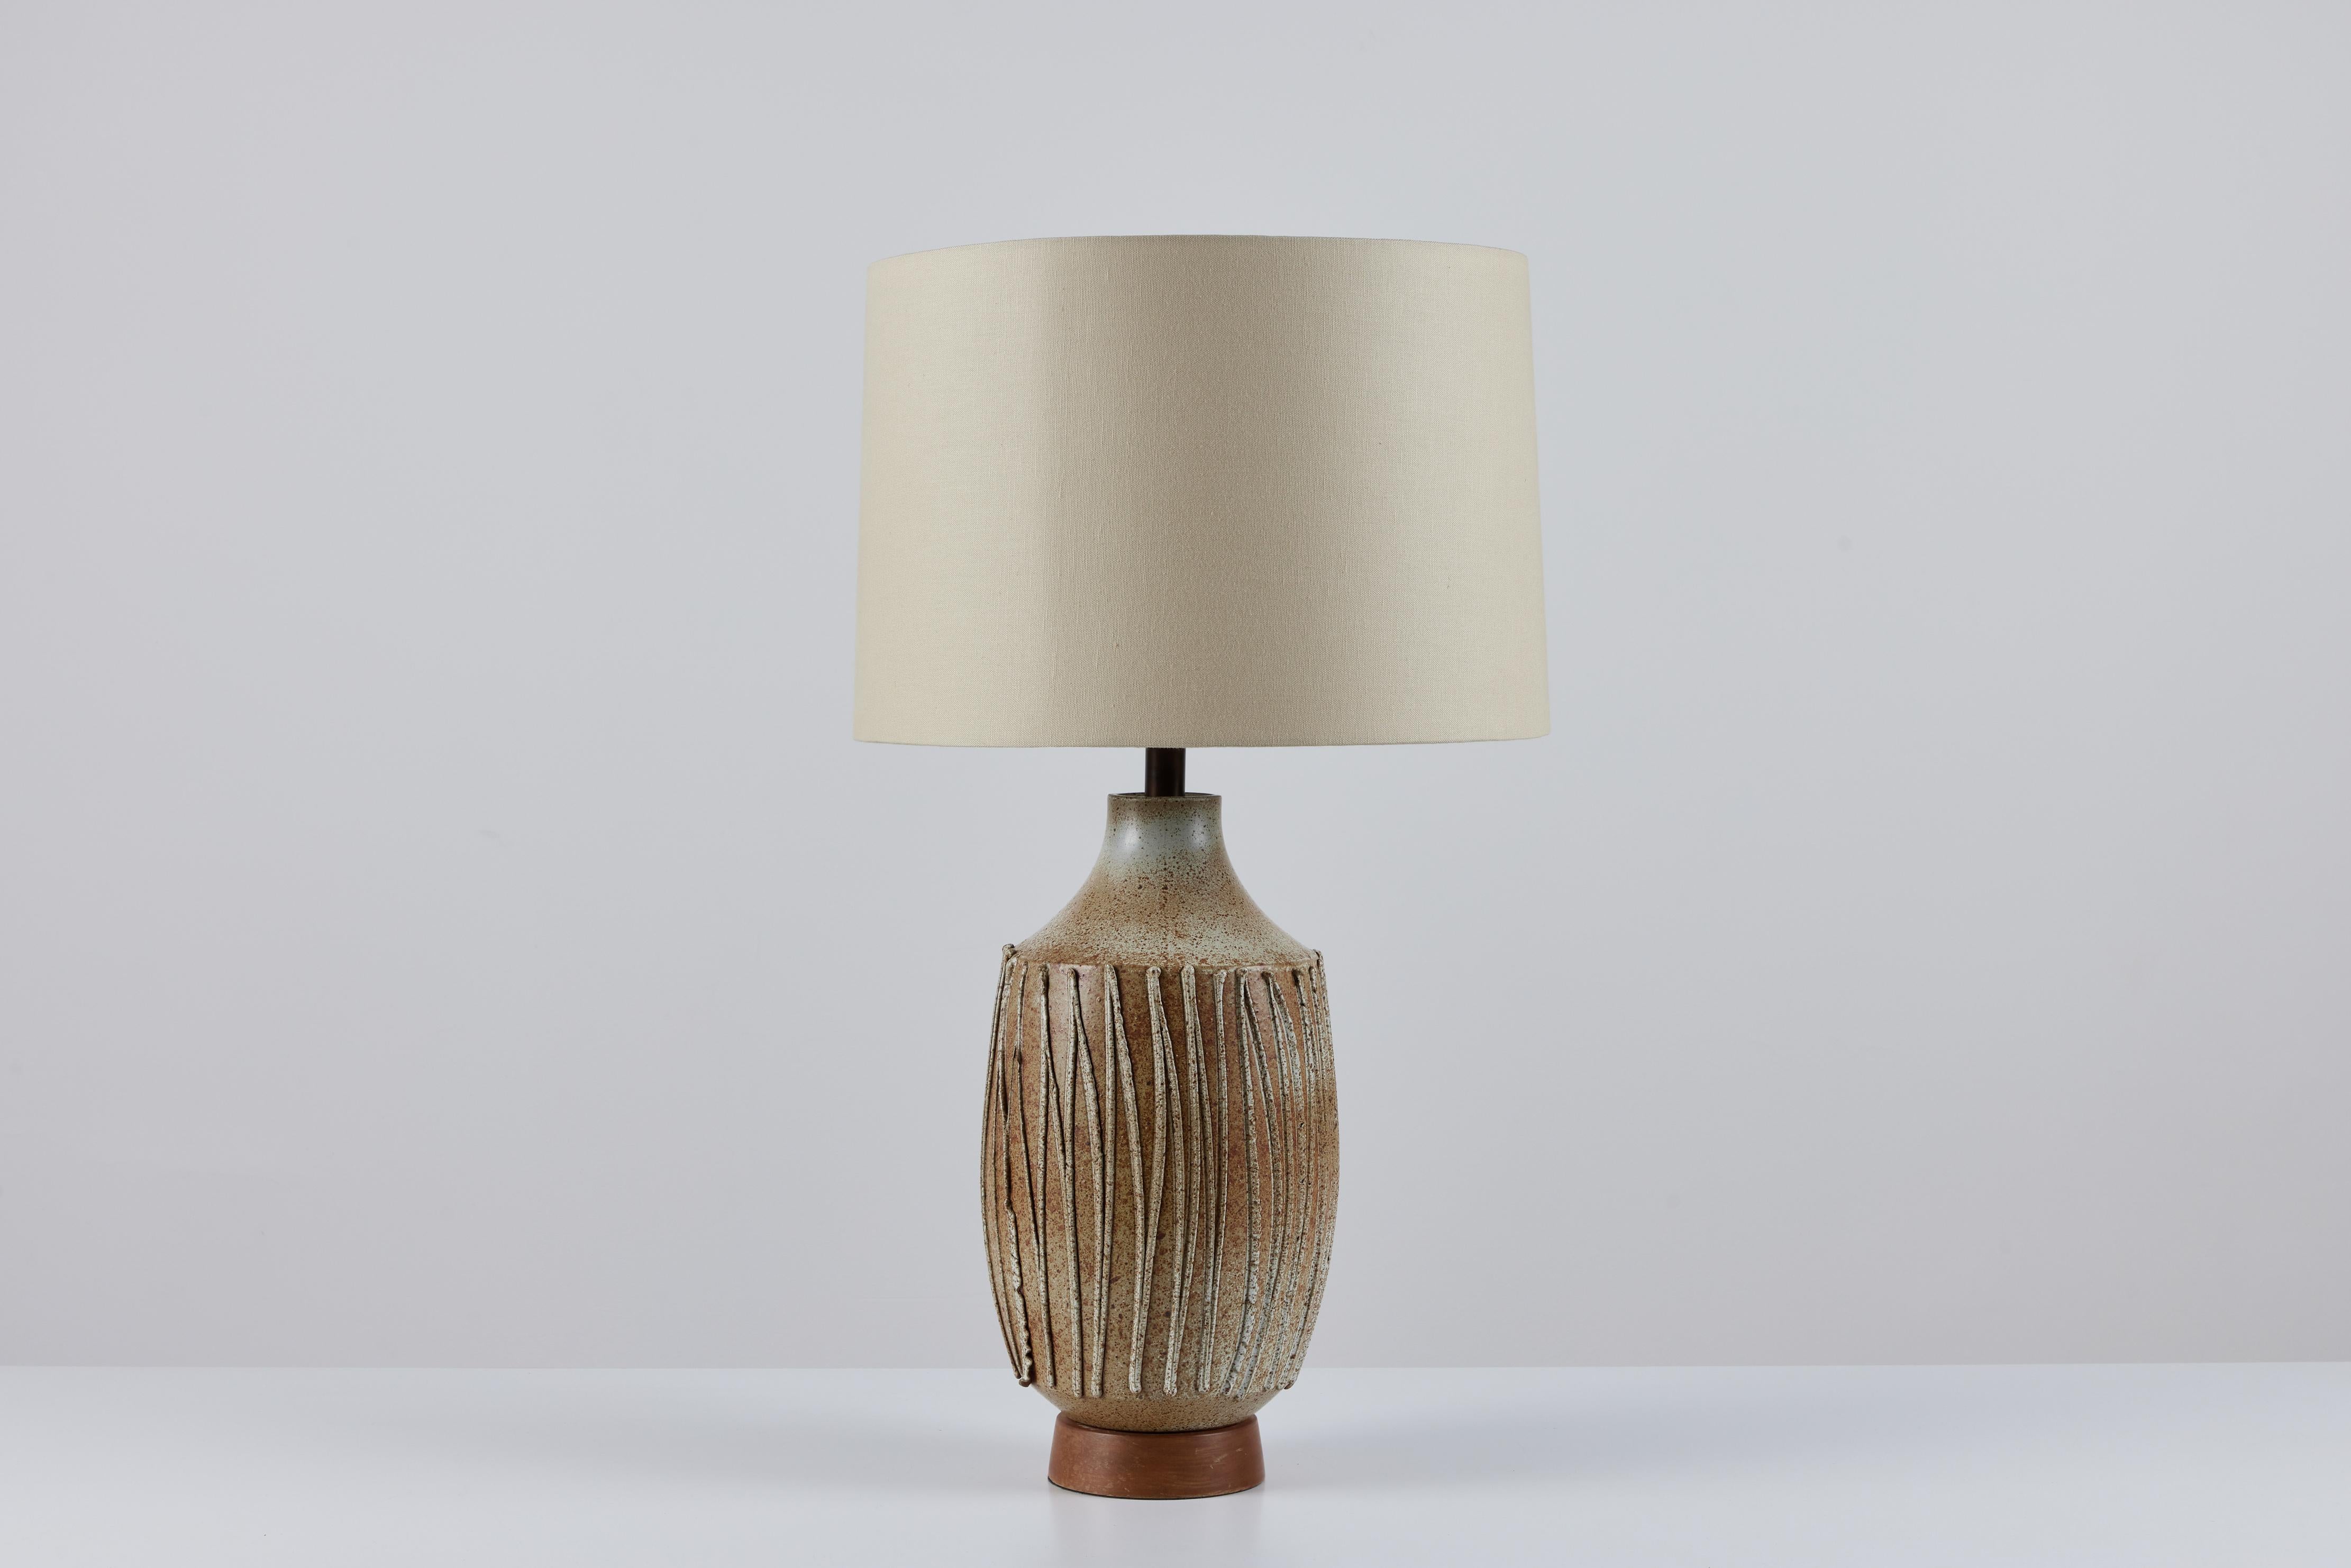 Glazed David Cressey Textured Stoneware Lamp for Architectural Pottery